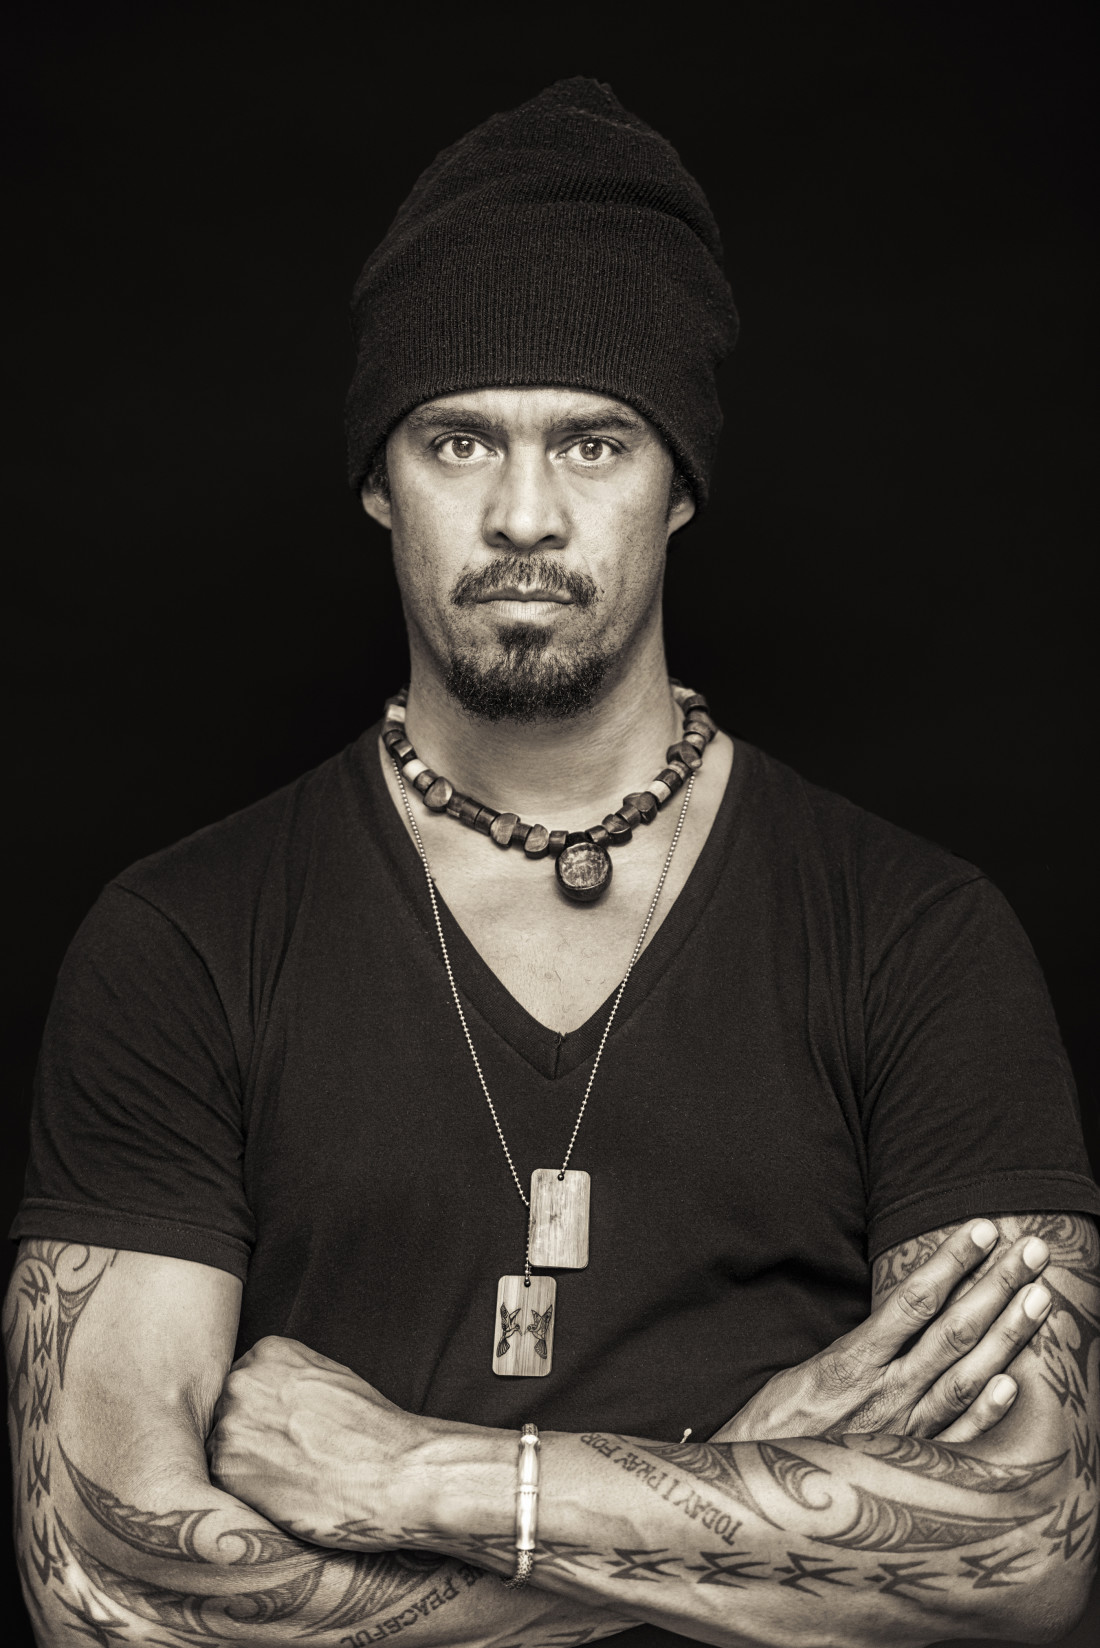 Back from knee surgery, Michael Franti and Spearhead play New Mountain